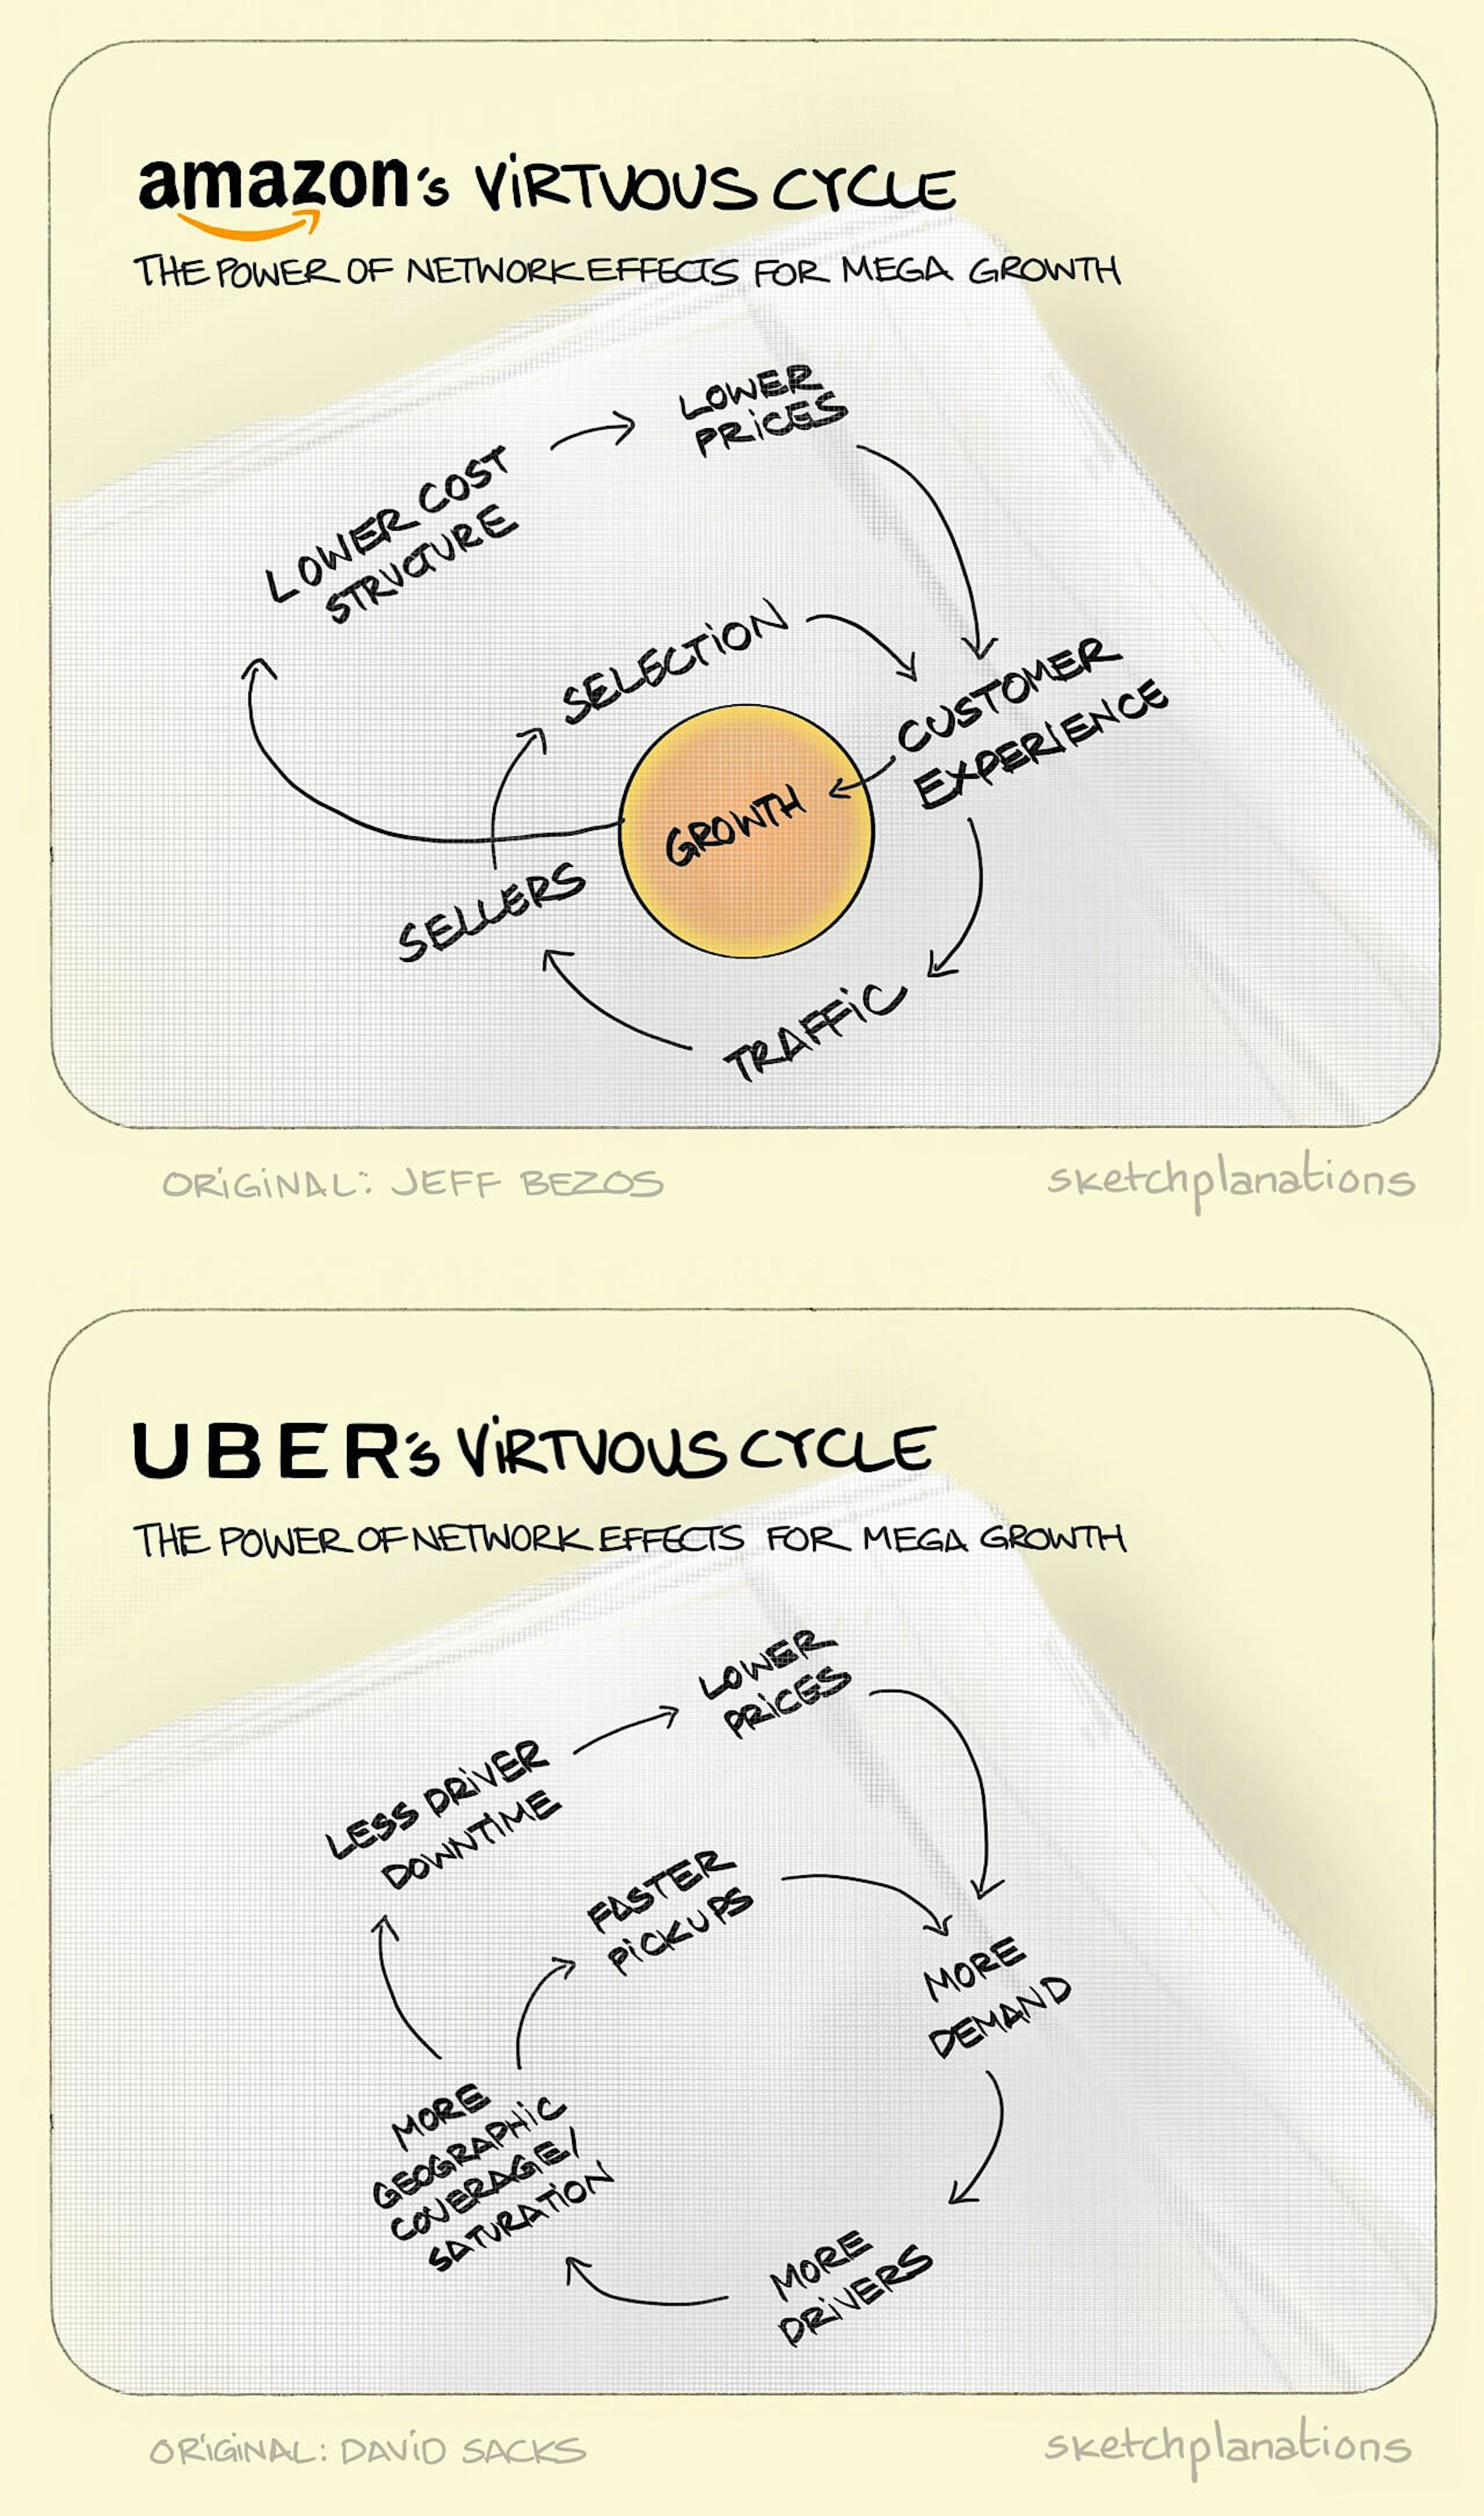 The "virtuous cycles" of Amazon and Uber illustration: closed loop flow diagrams demonstrate the effect of growth on factors like demand, price and service for Amazon and Uber. 